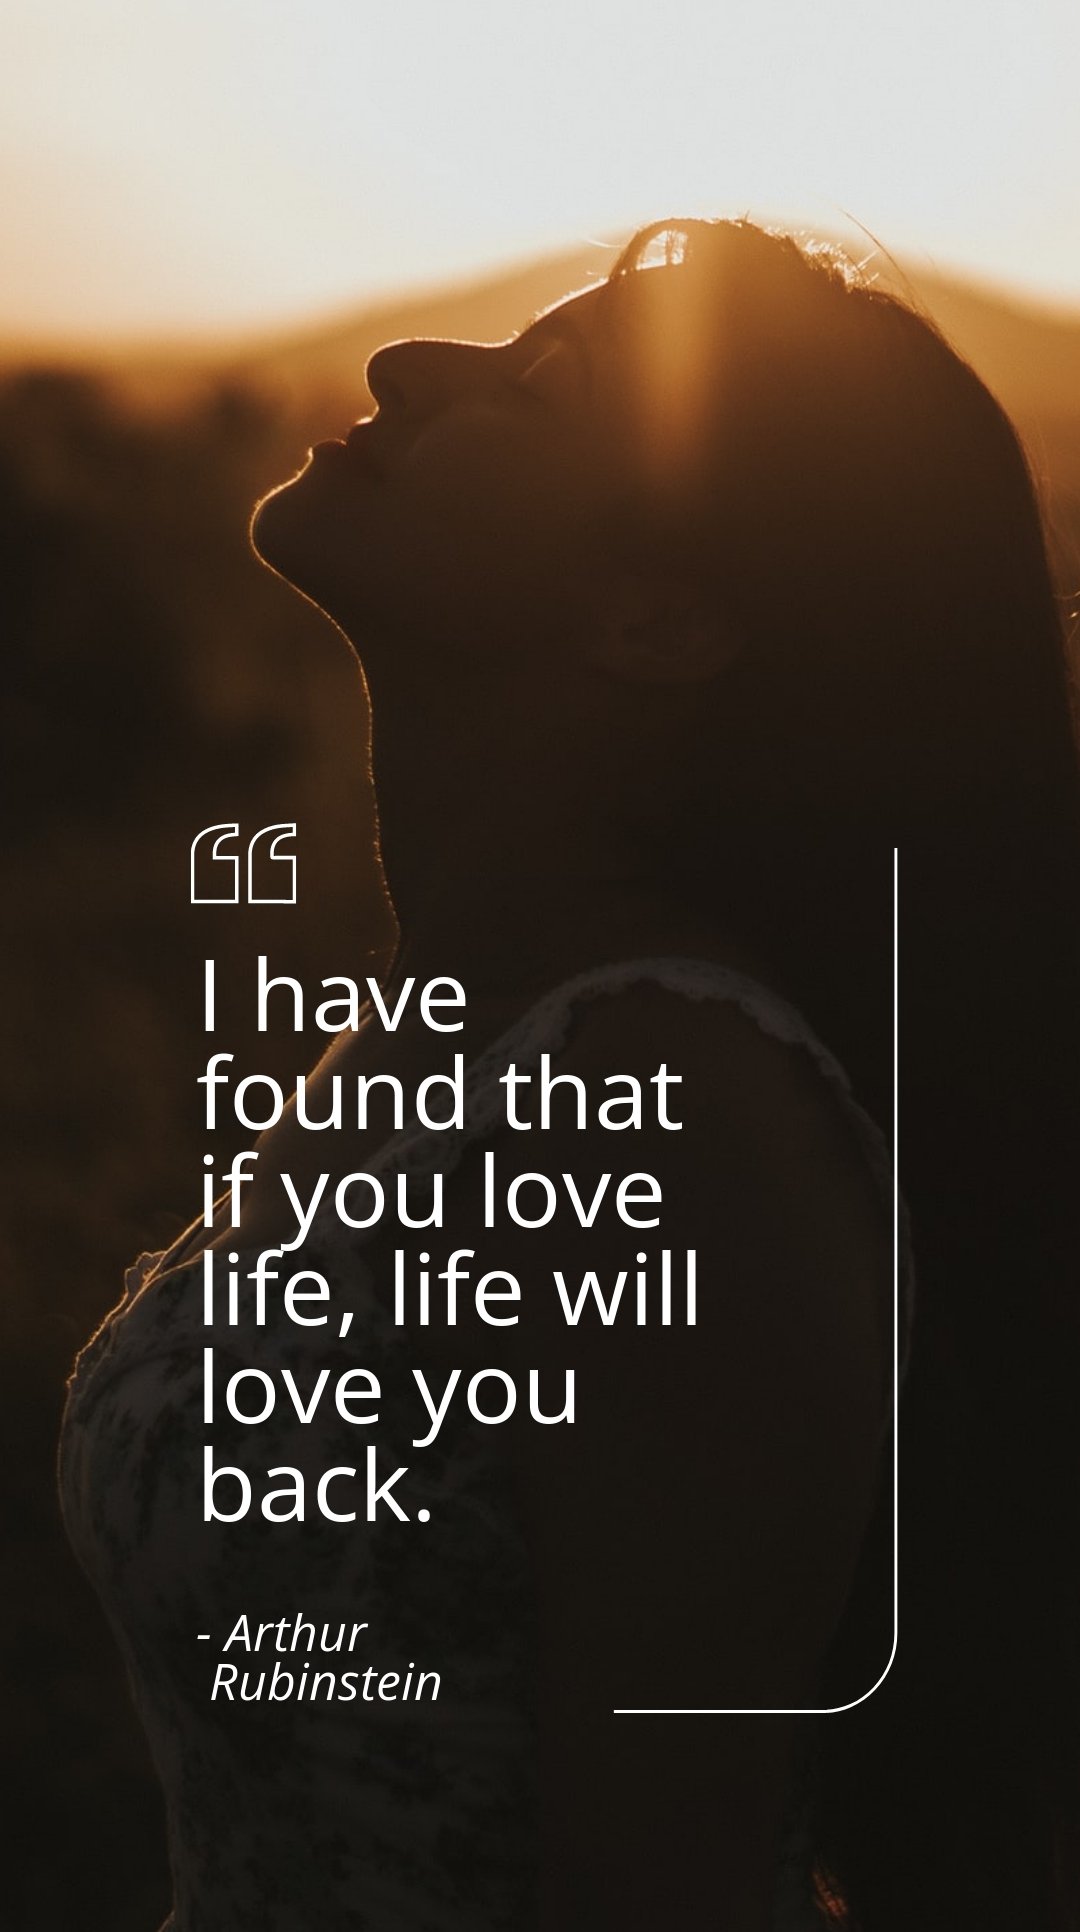 Arthur Rubinstein - I have found that if you love life, life will love you back.